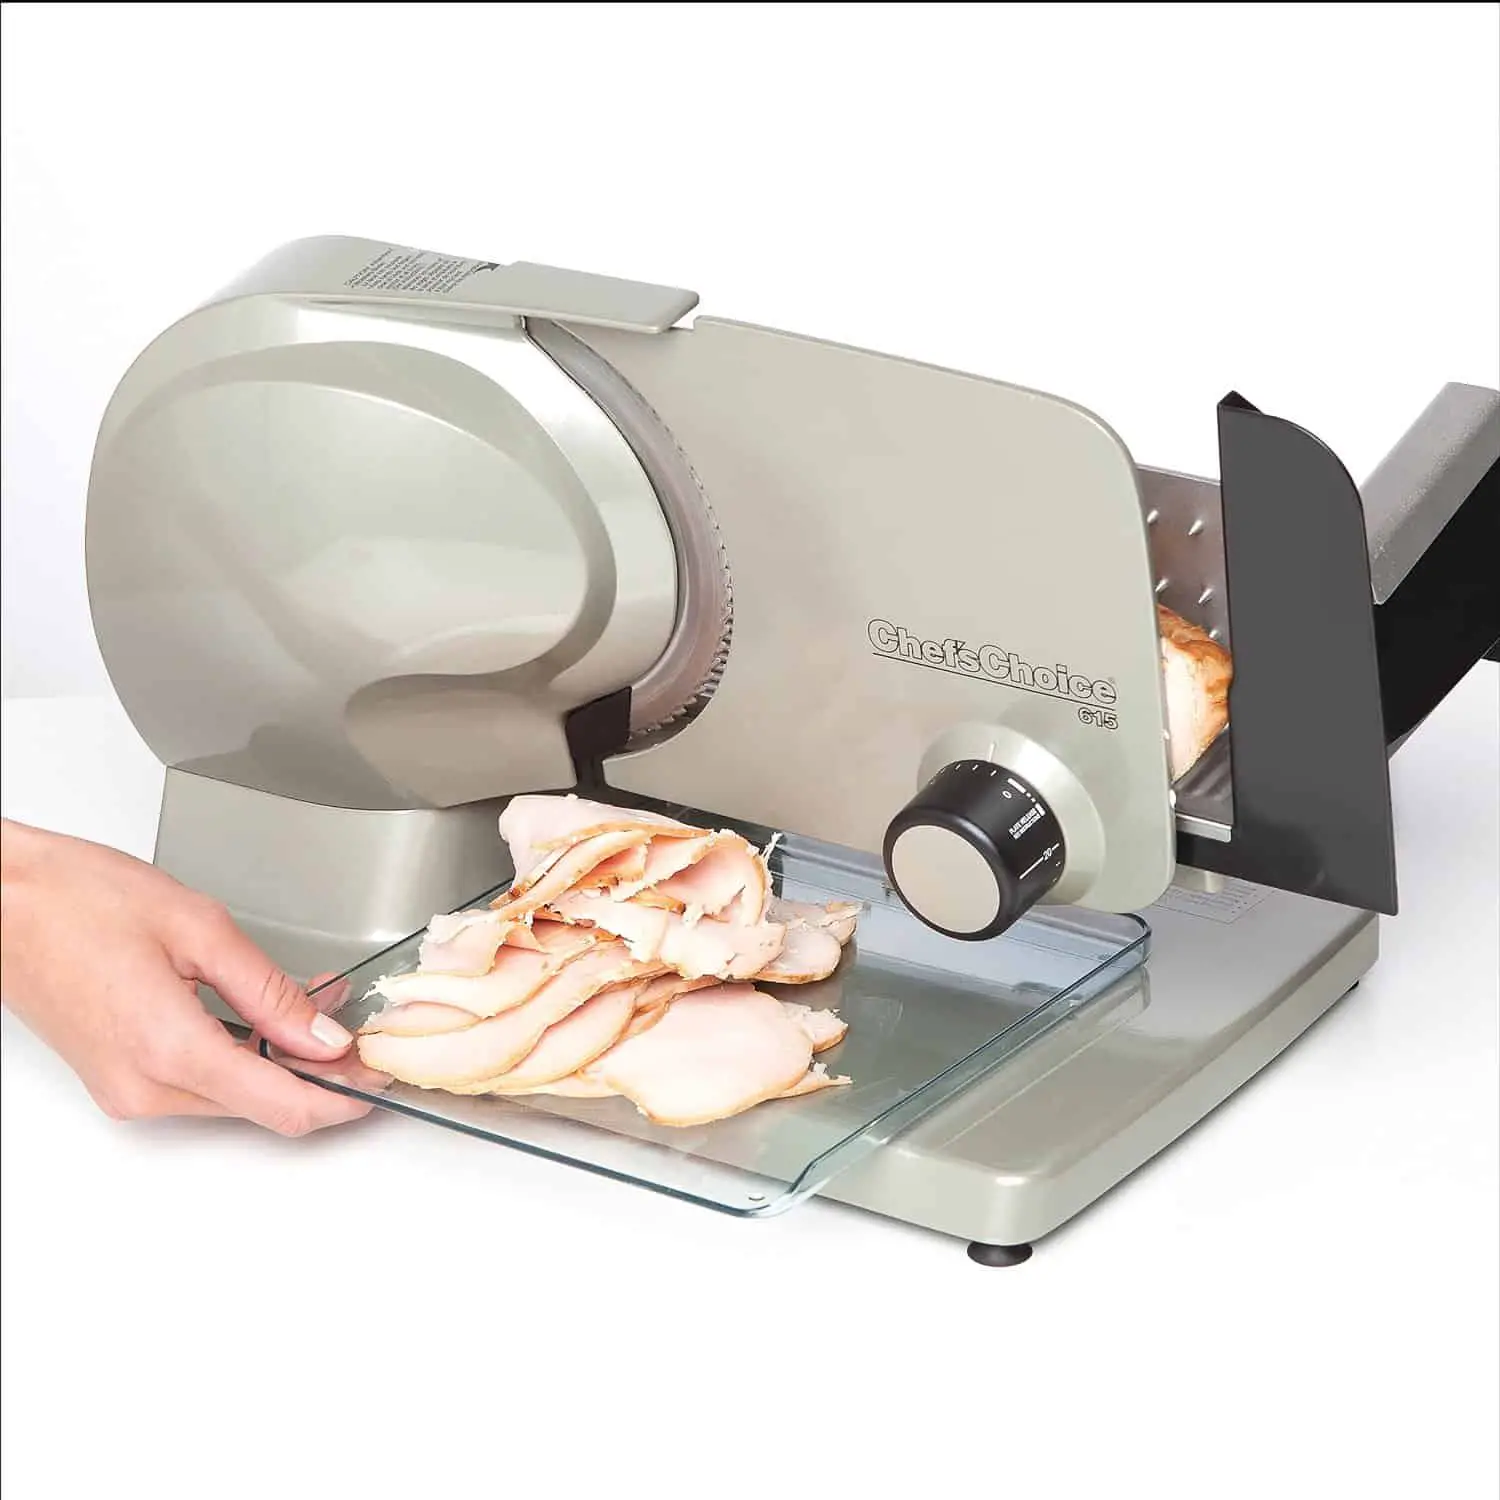 How expensive are the best electric meat slicers?